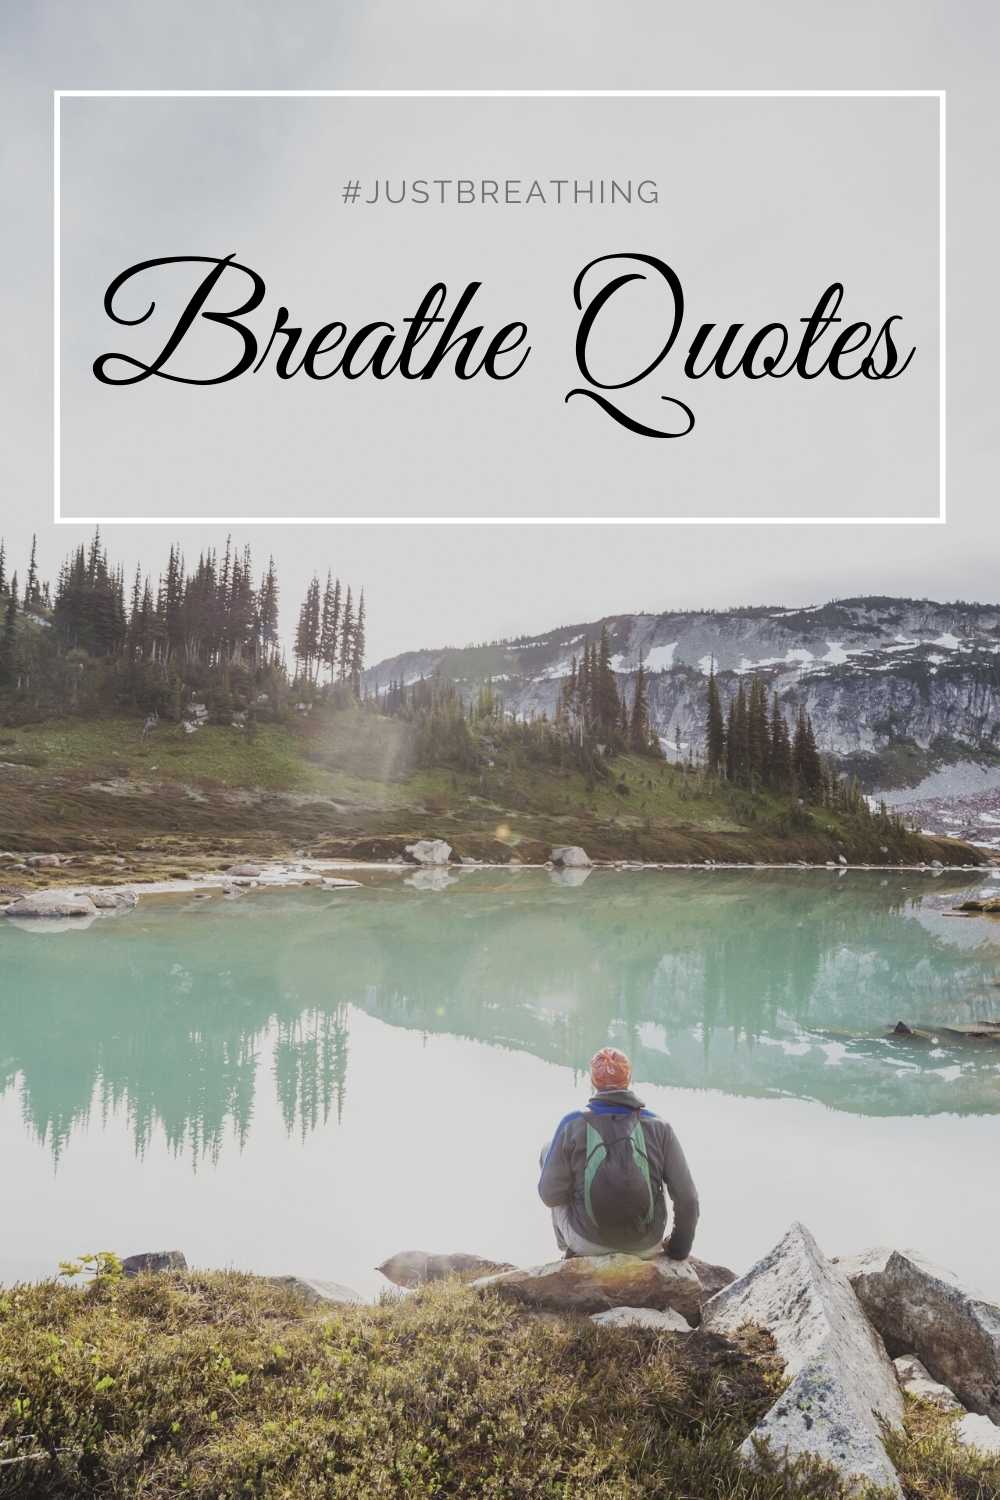 Breathe Quotes to live every moment of life - Just Breathing!